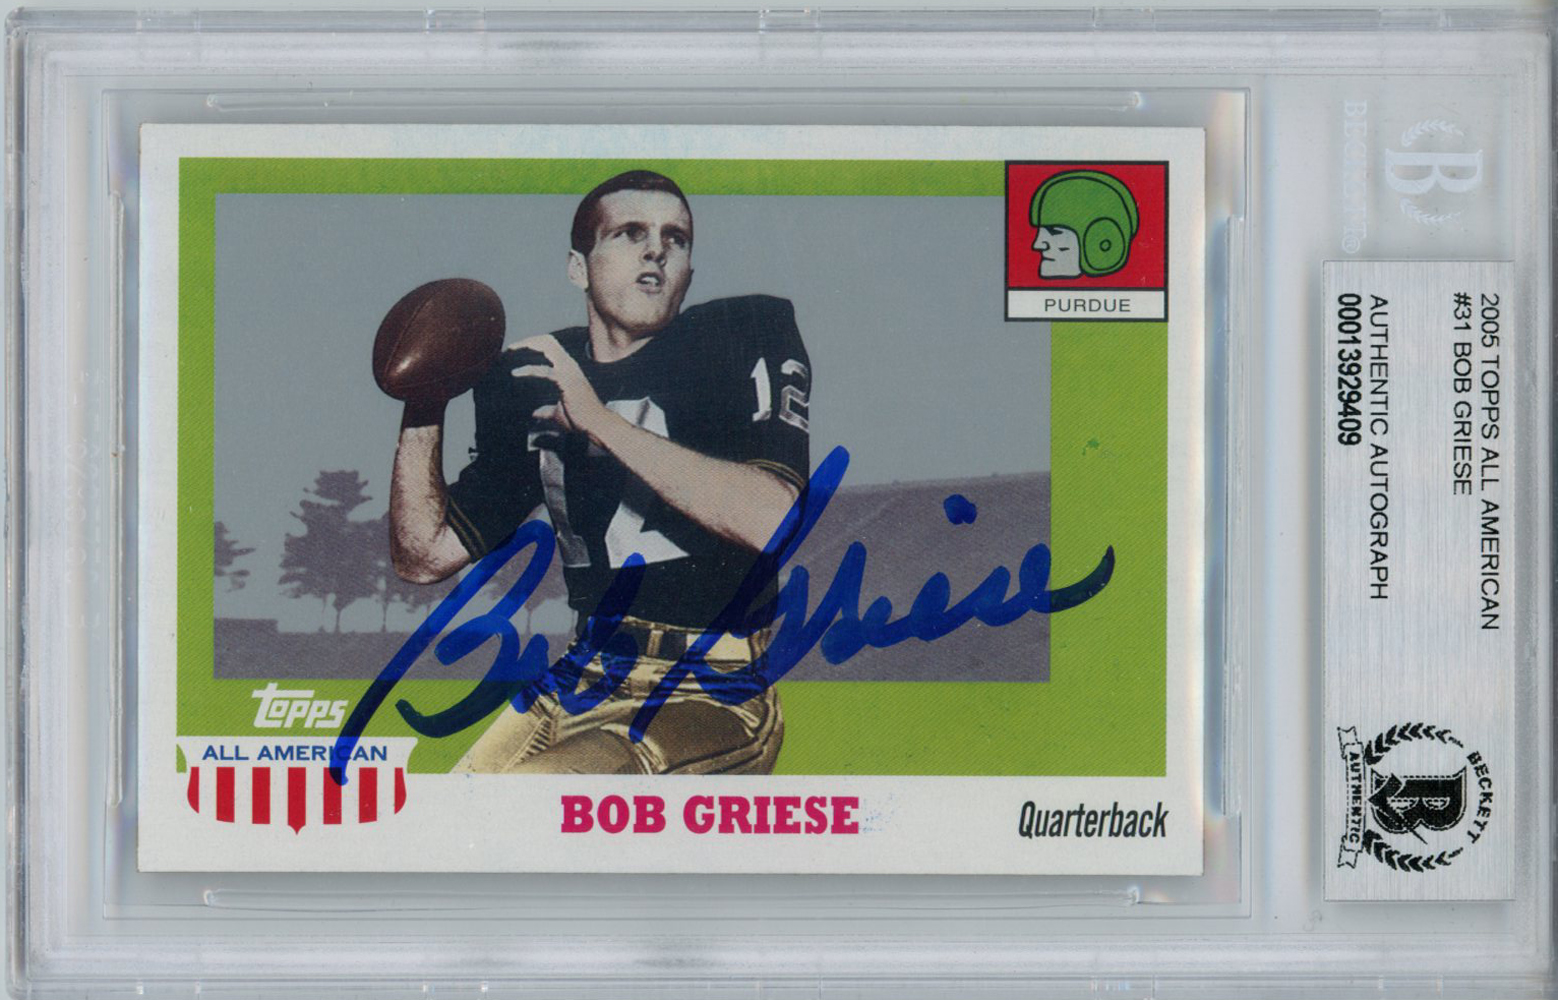 Bob Griese Autographed 2005 Topps All American Trading Card Beckett Slab